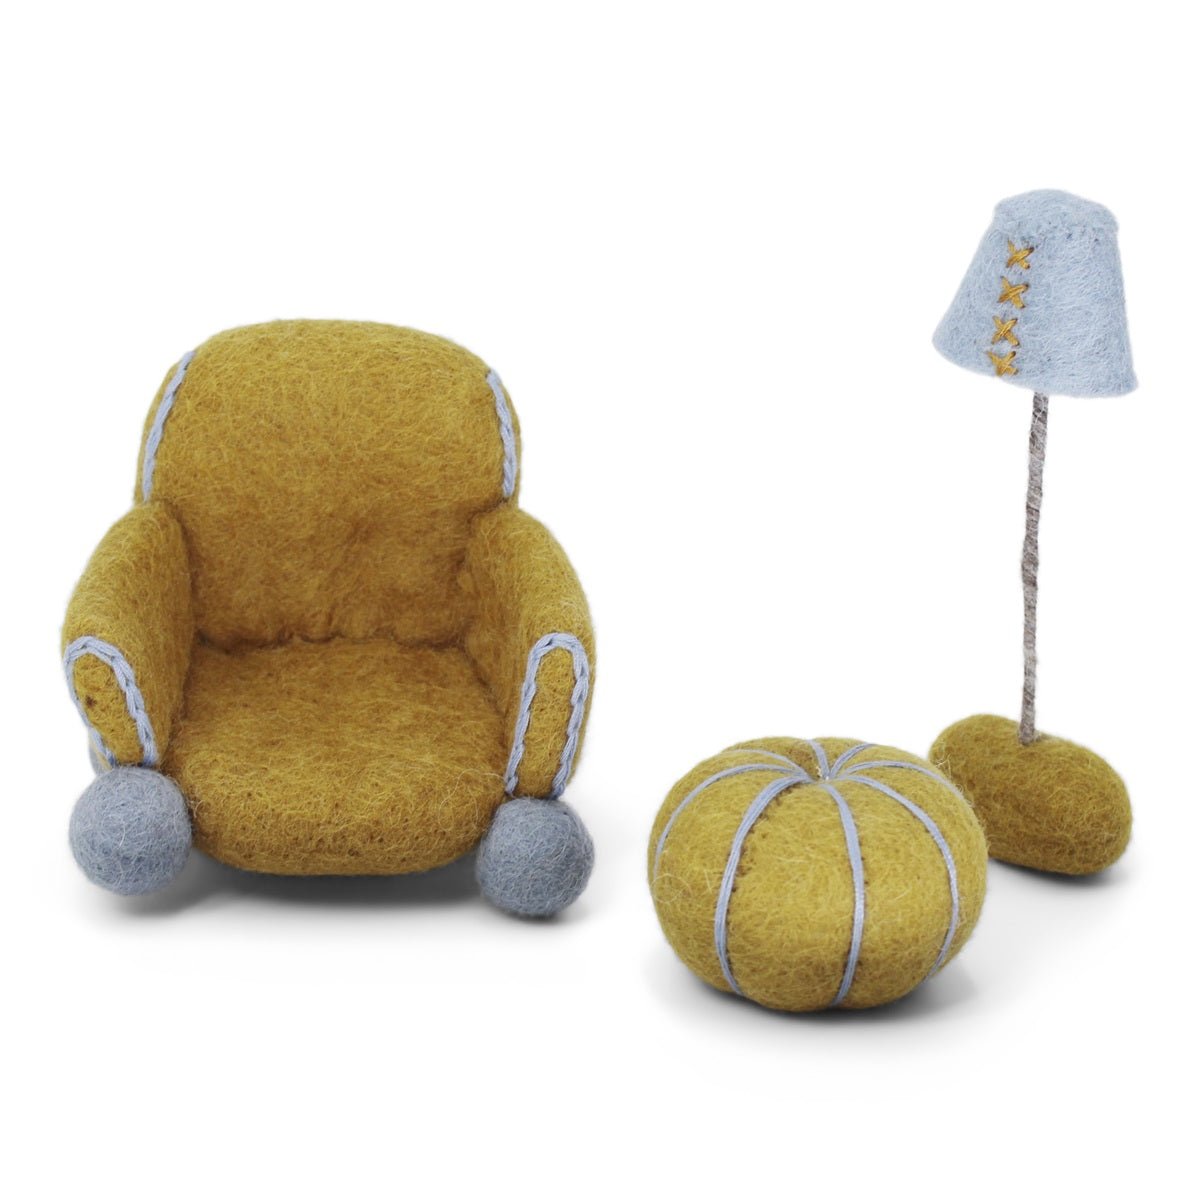 Ochre Chair, Pillow and Lamp by Én Gry & Sif - Maude Kids Decor